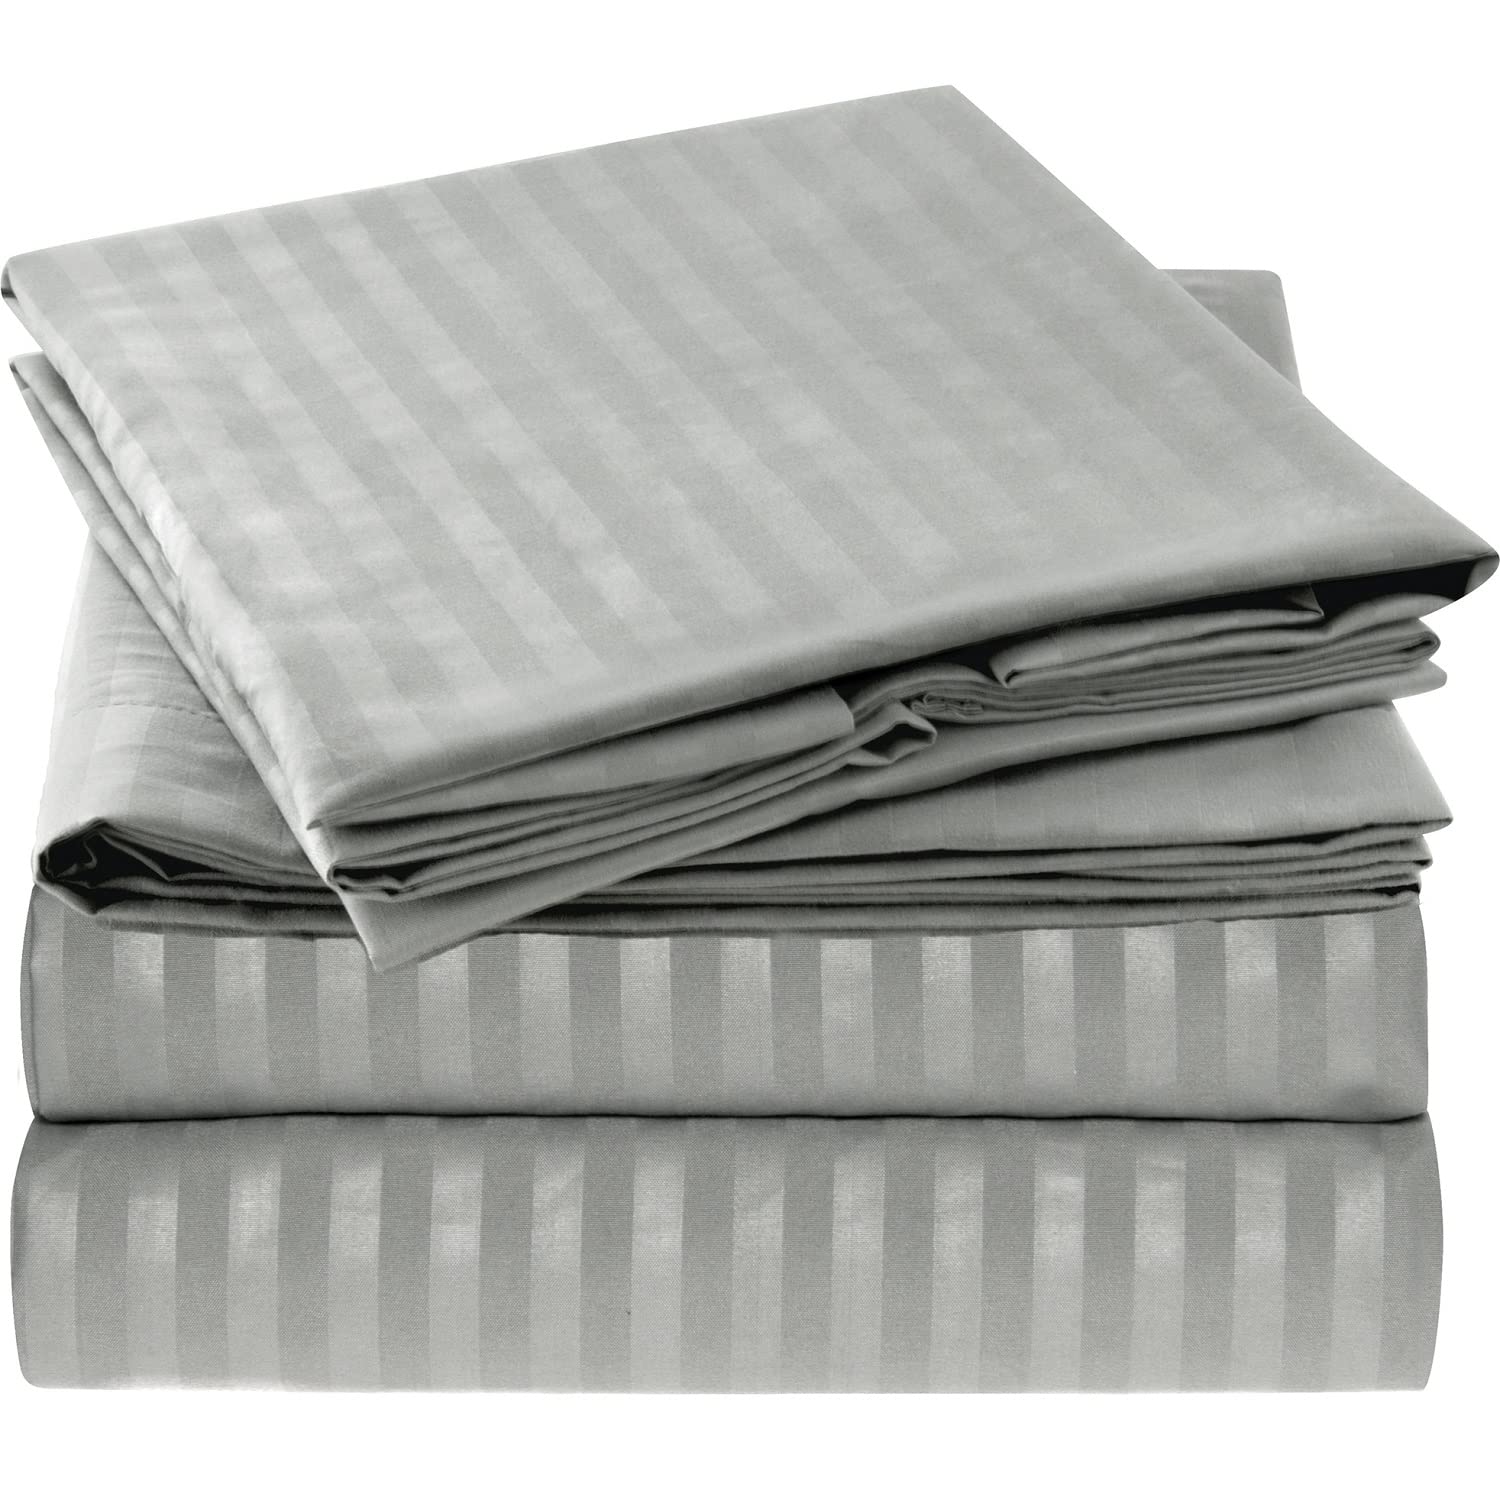 Book Cover Mellanni Twin XL Sheet Set - 3 Piece Iconic Collection Bedding Sheets & Pillowcases - Soft, Cooling Bed Sheets - Deep Pocket up to 16 inch - Fits College Dorm Mattress (Twin XL, Striped Gray/Silver) Twin XL Striped – Gray / Silver